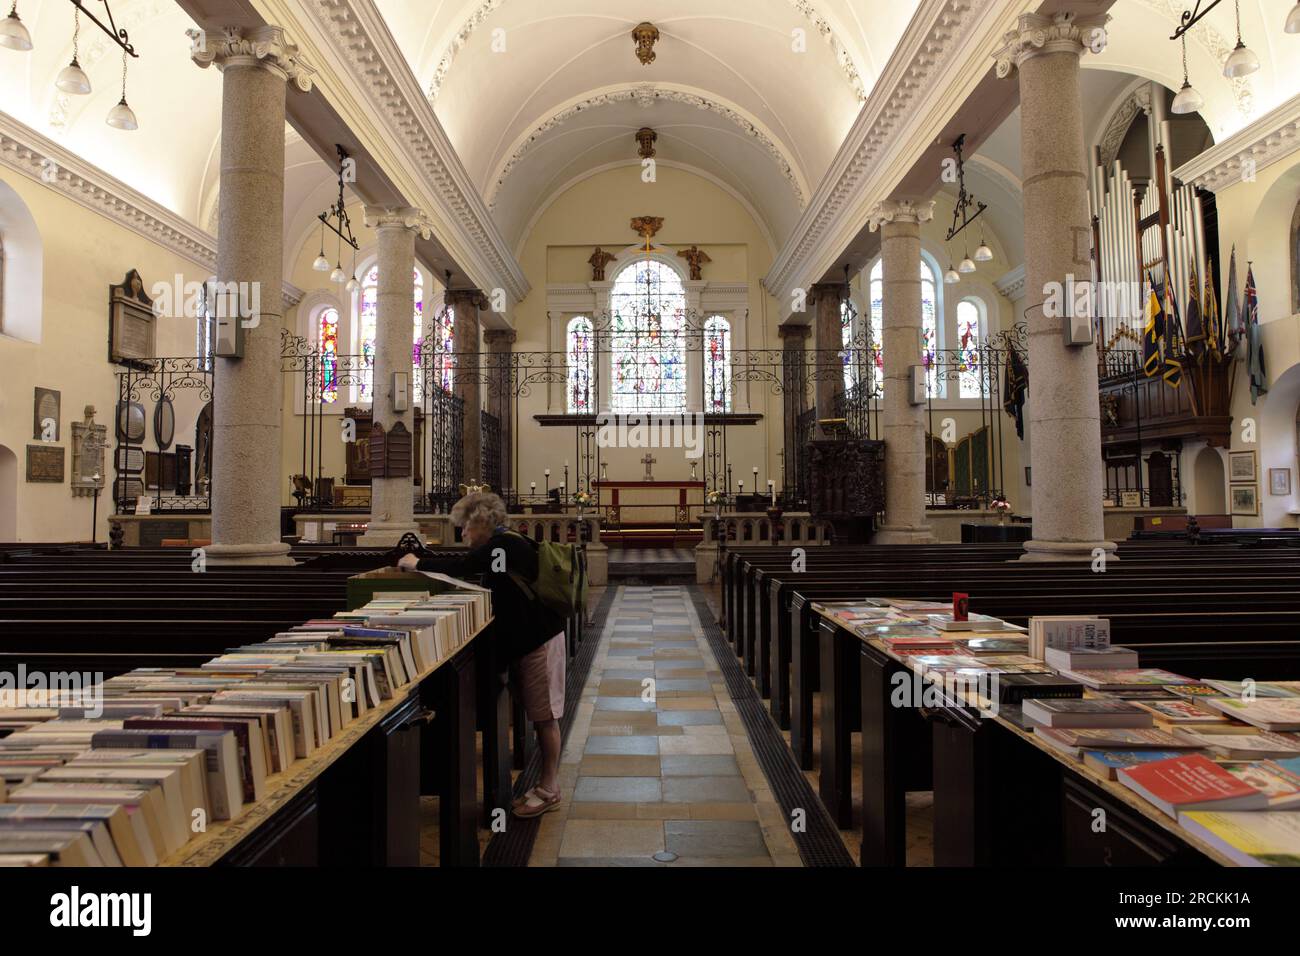 Internal aspect of Church of King Charles the Martyr in High Street, Falmouth, Cornwall. Stock Photo